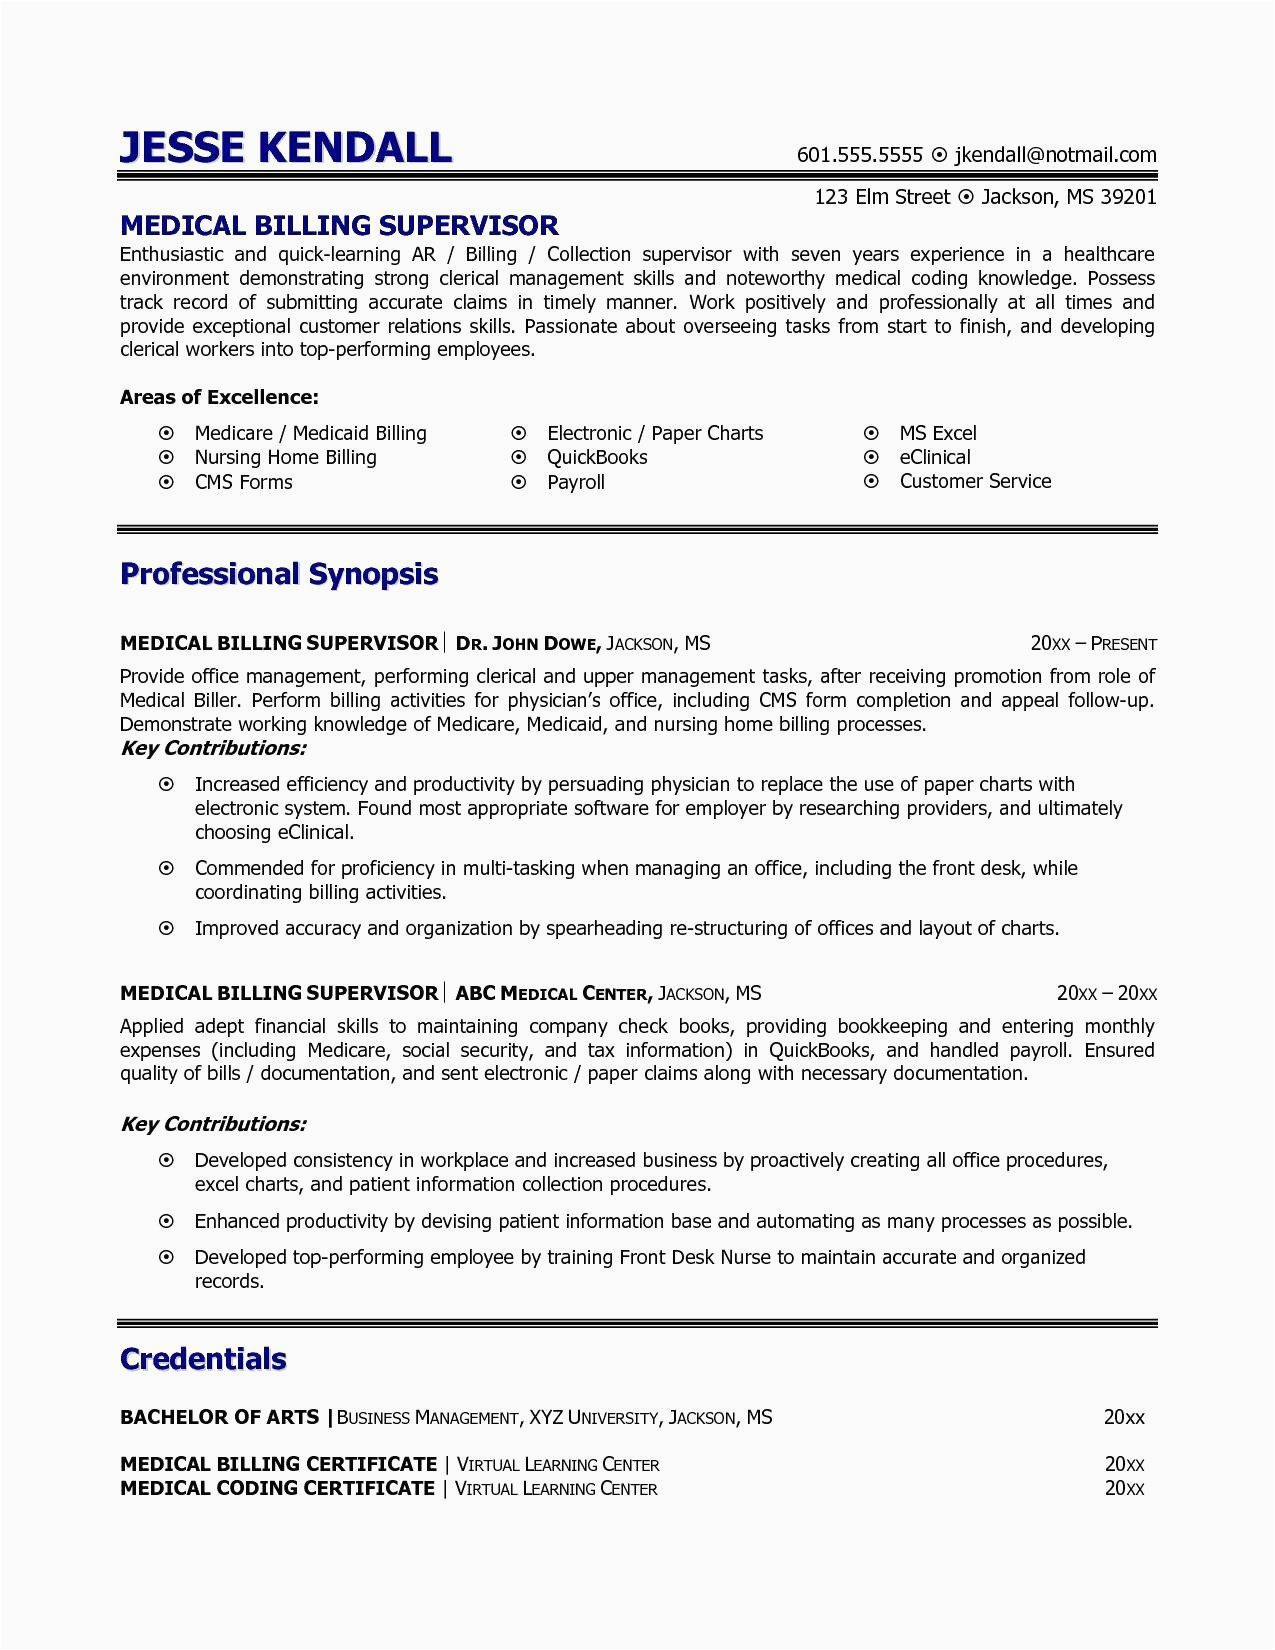 Sample Resume for Coding and Billing 23 Medical Coding Resume Example In 2020